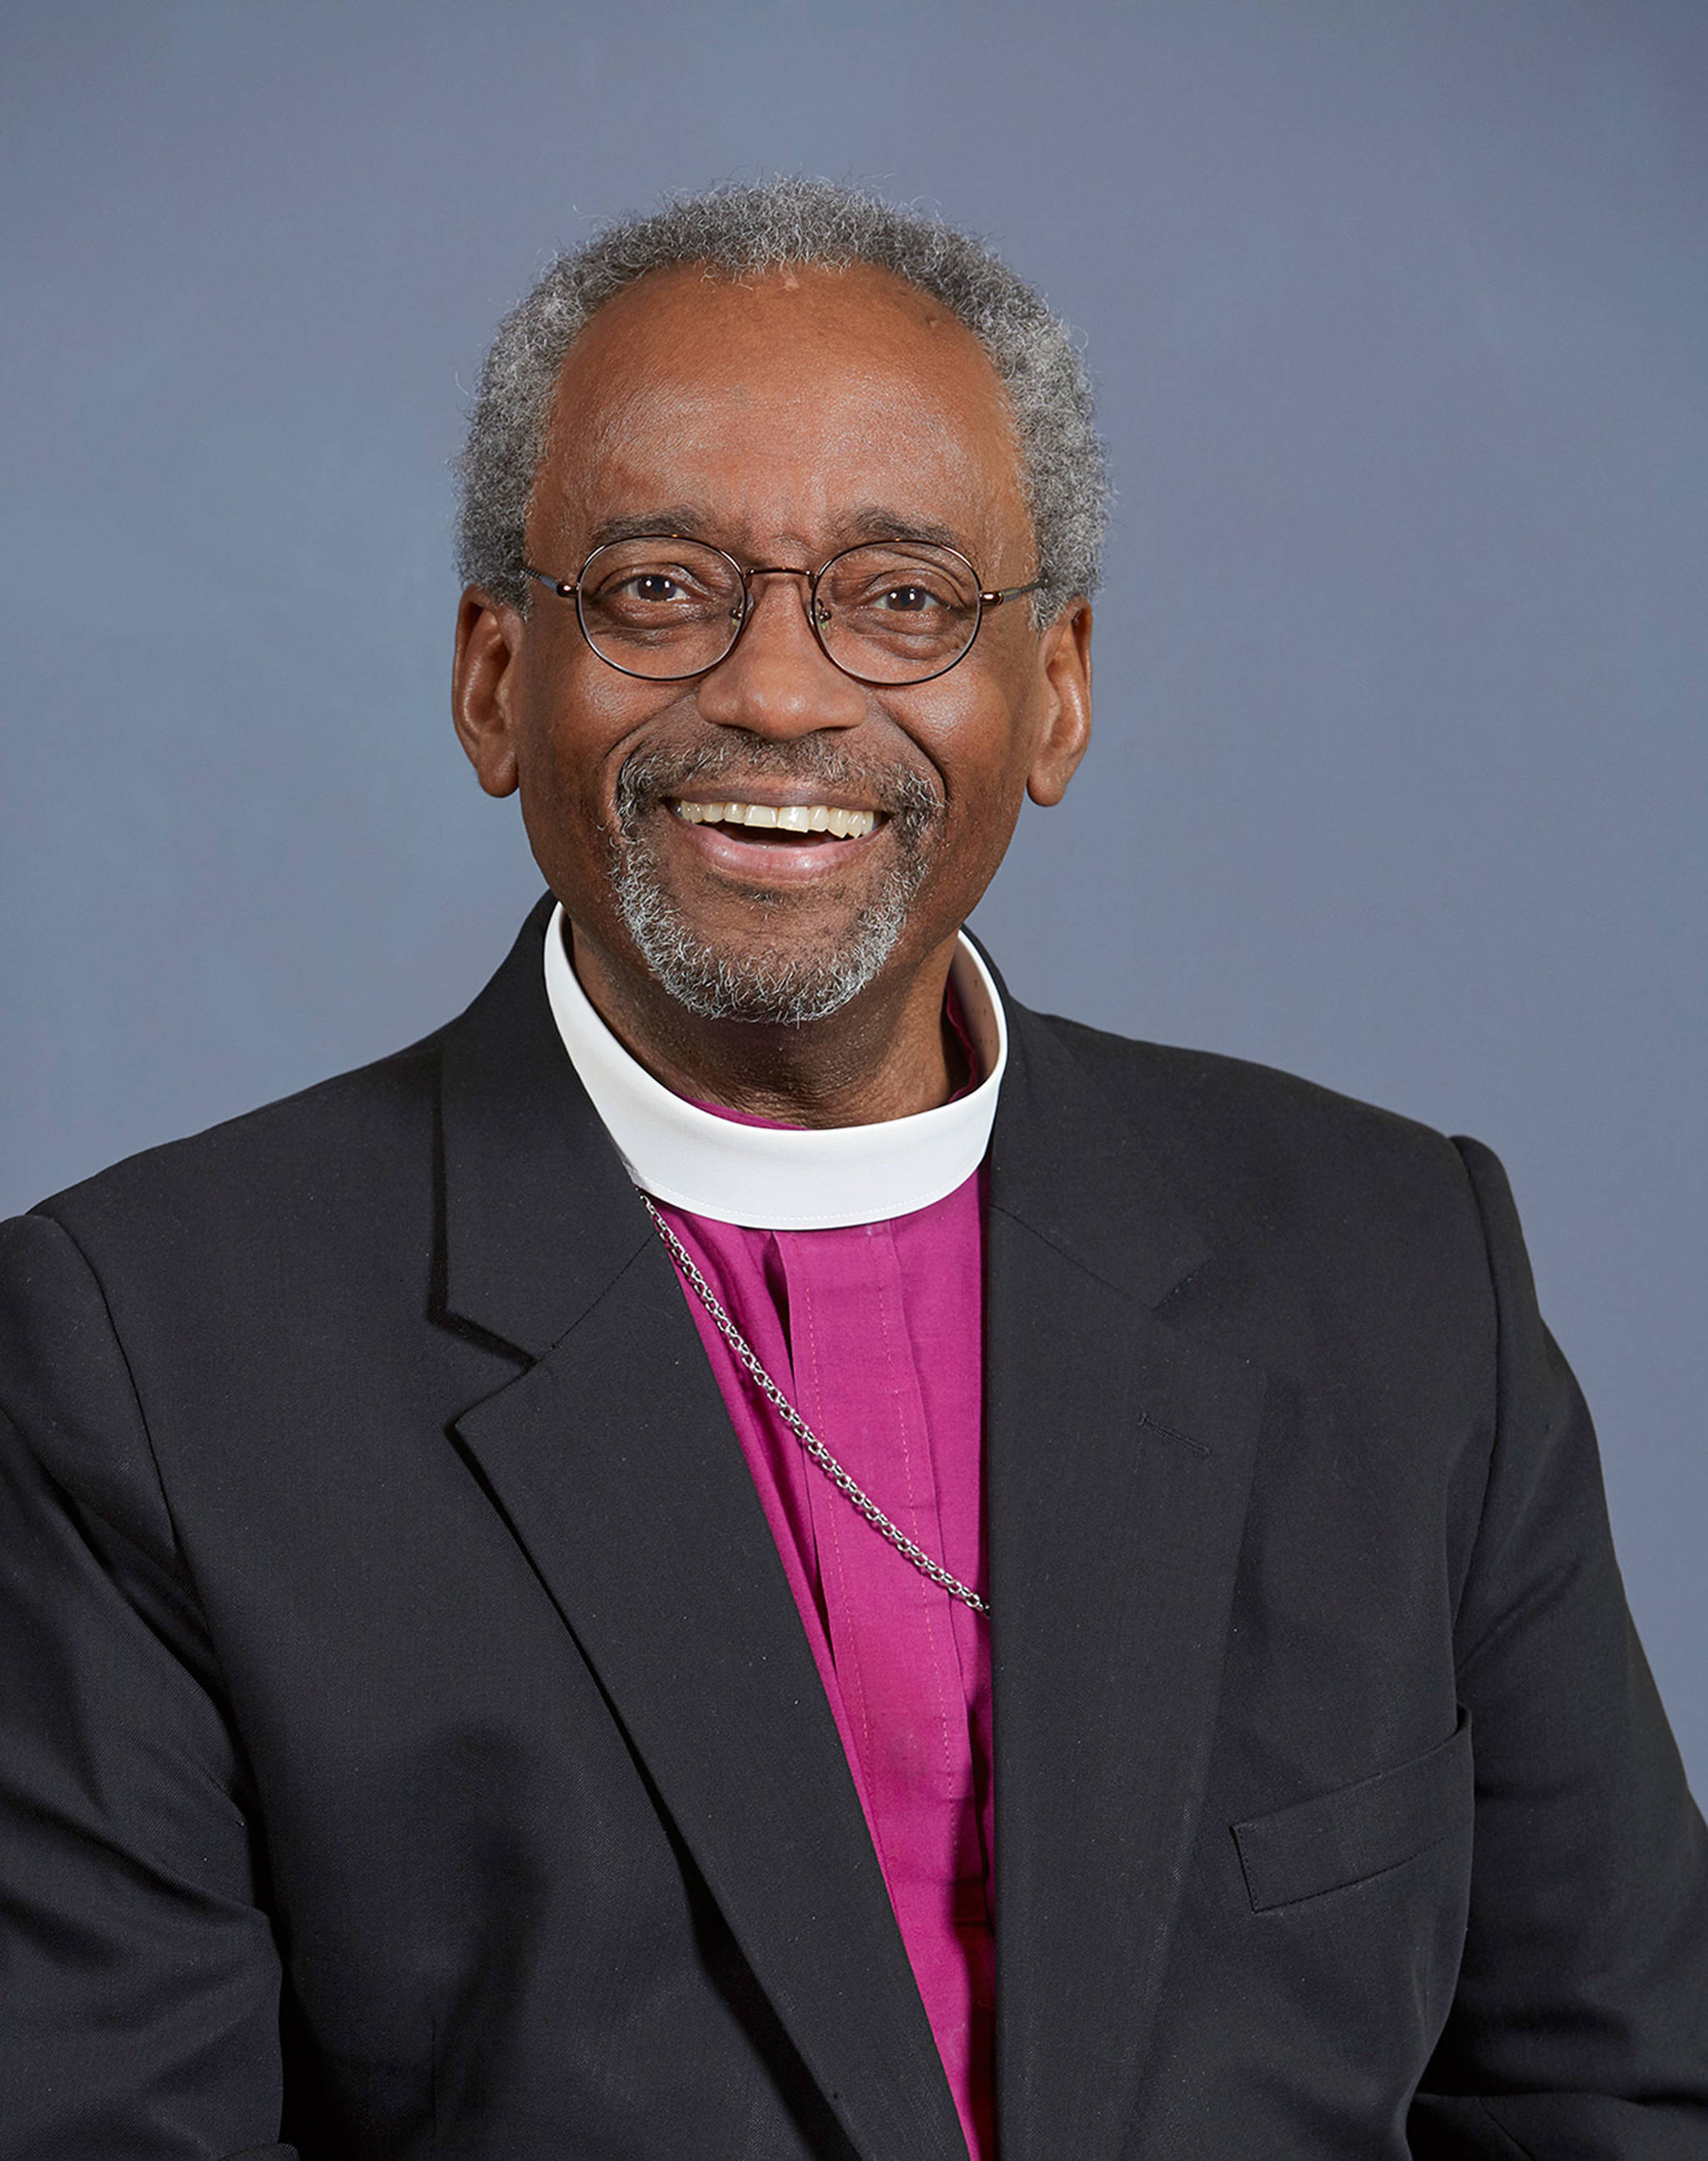 Bishop Michael Curry, who sermonized at the royal wedding visiting Aberdeen to call attention to homelessness